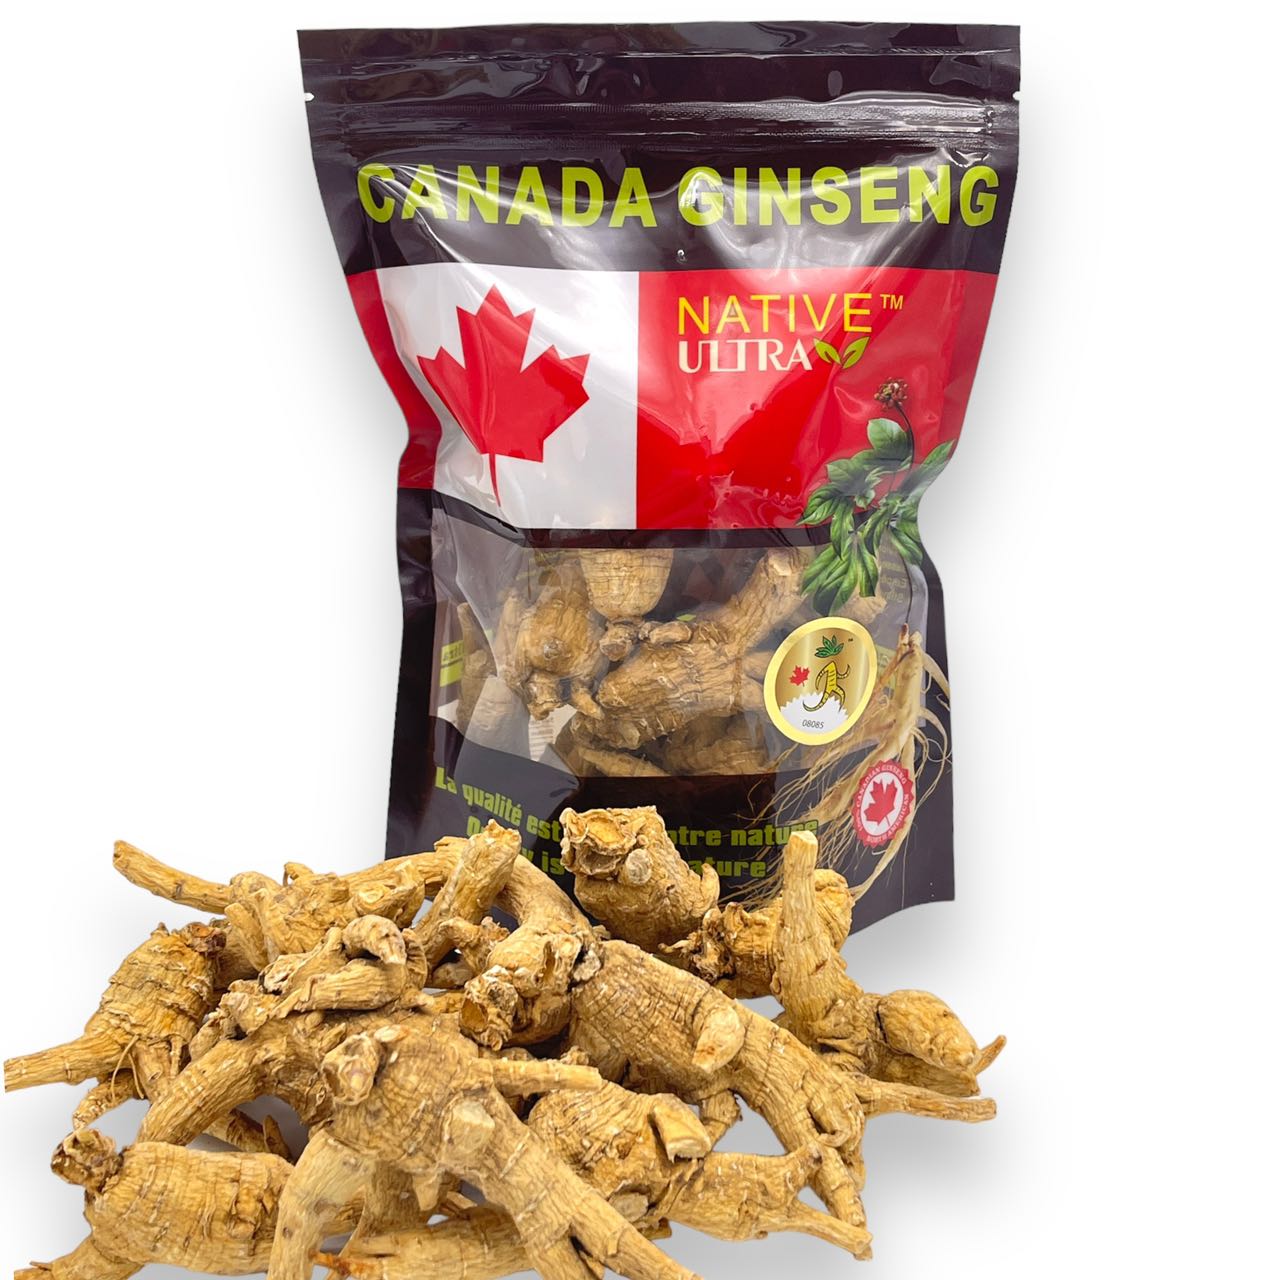 "NATIVE ULTRA" 6-Year Selected Canadian Ginseng Whole Roots, 454g/bag